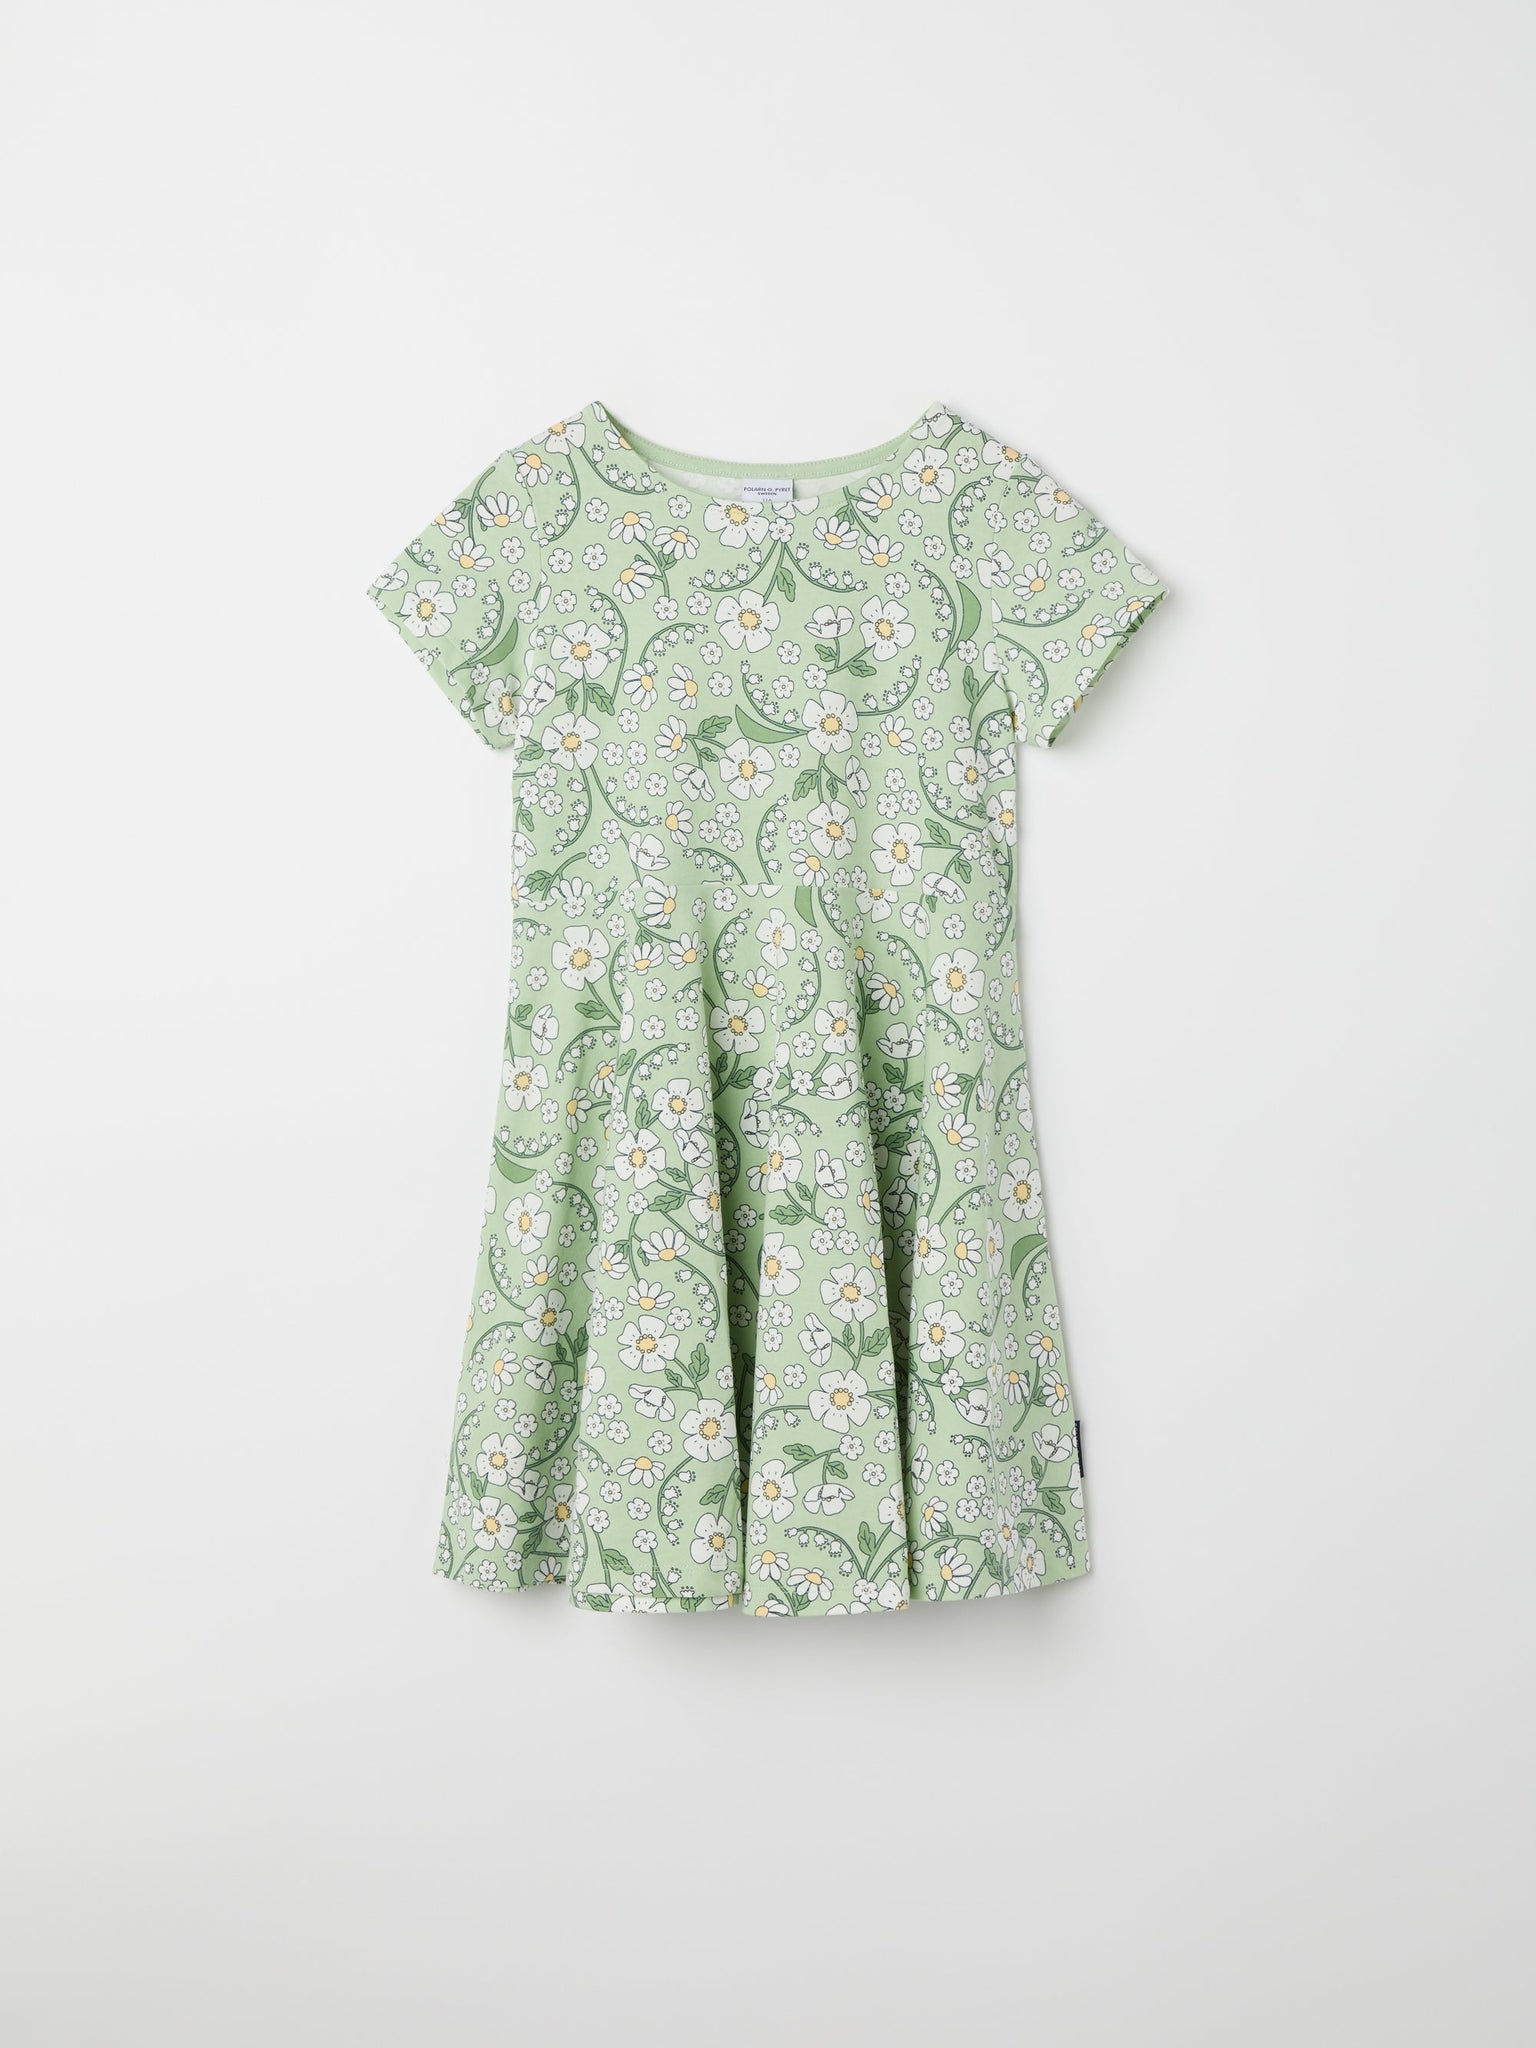 Daisy Print Kids Dress from the Polarn O. Pyret kidswear collection. Clothes made using sustainably sourced materials.